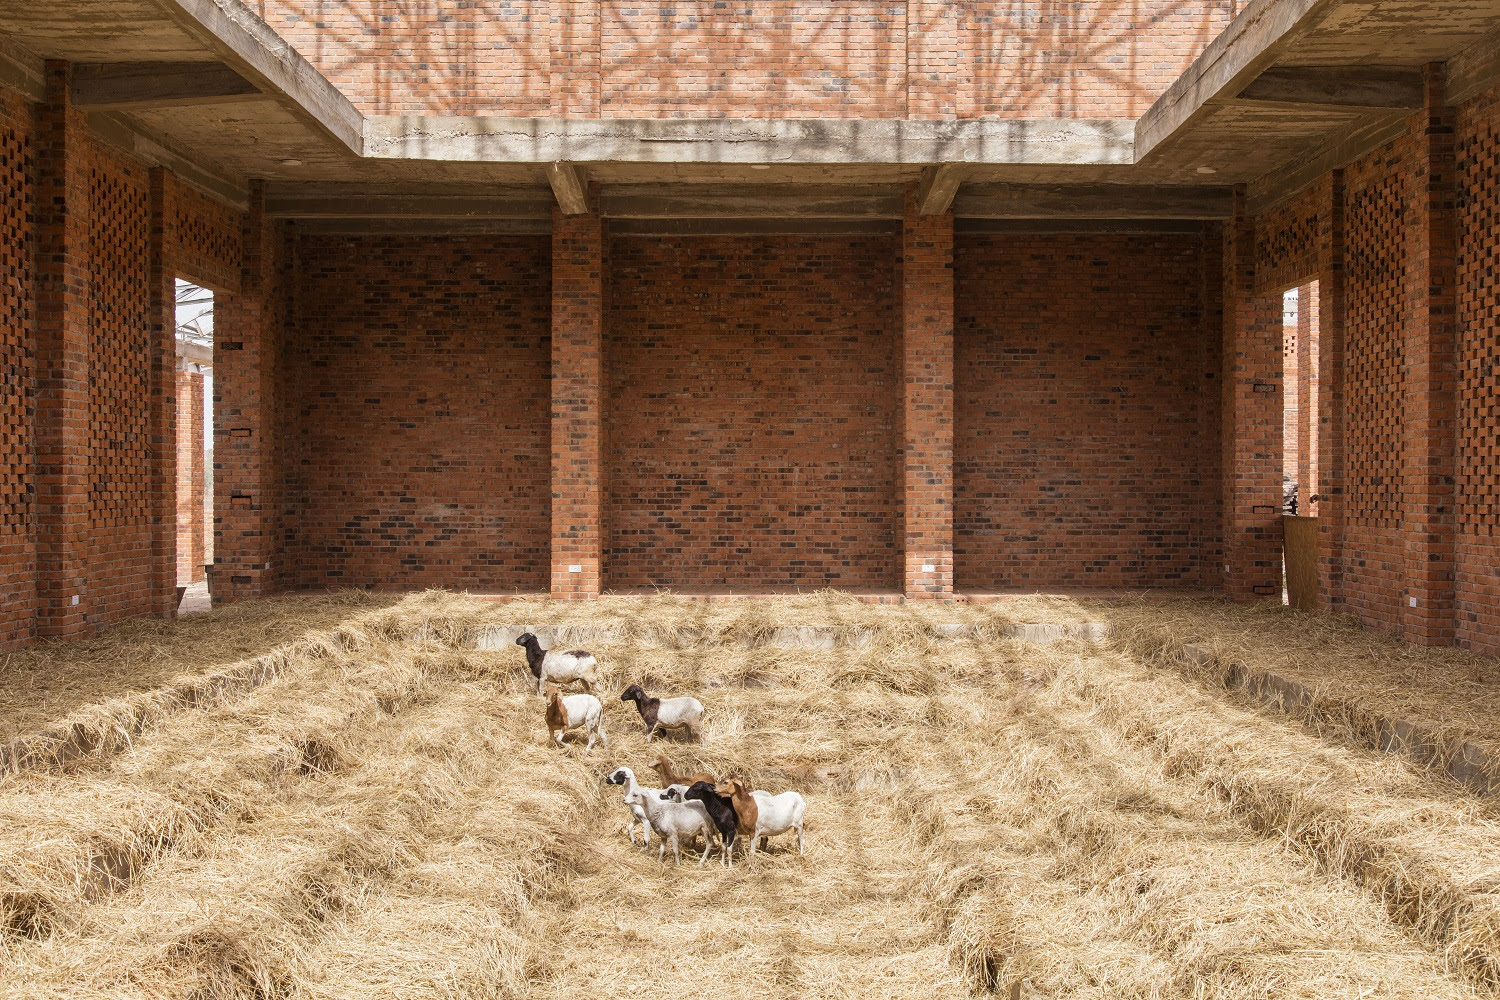 Ibrahim Mahama, Sheep and Hay. Parliament of Ghosts Series. Red Clay Tamale